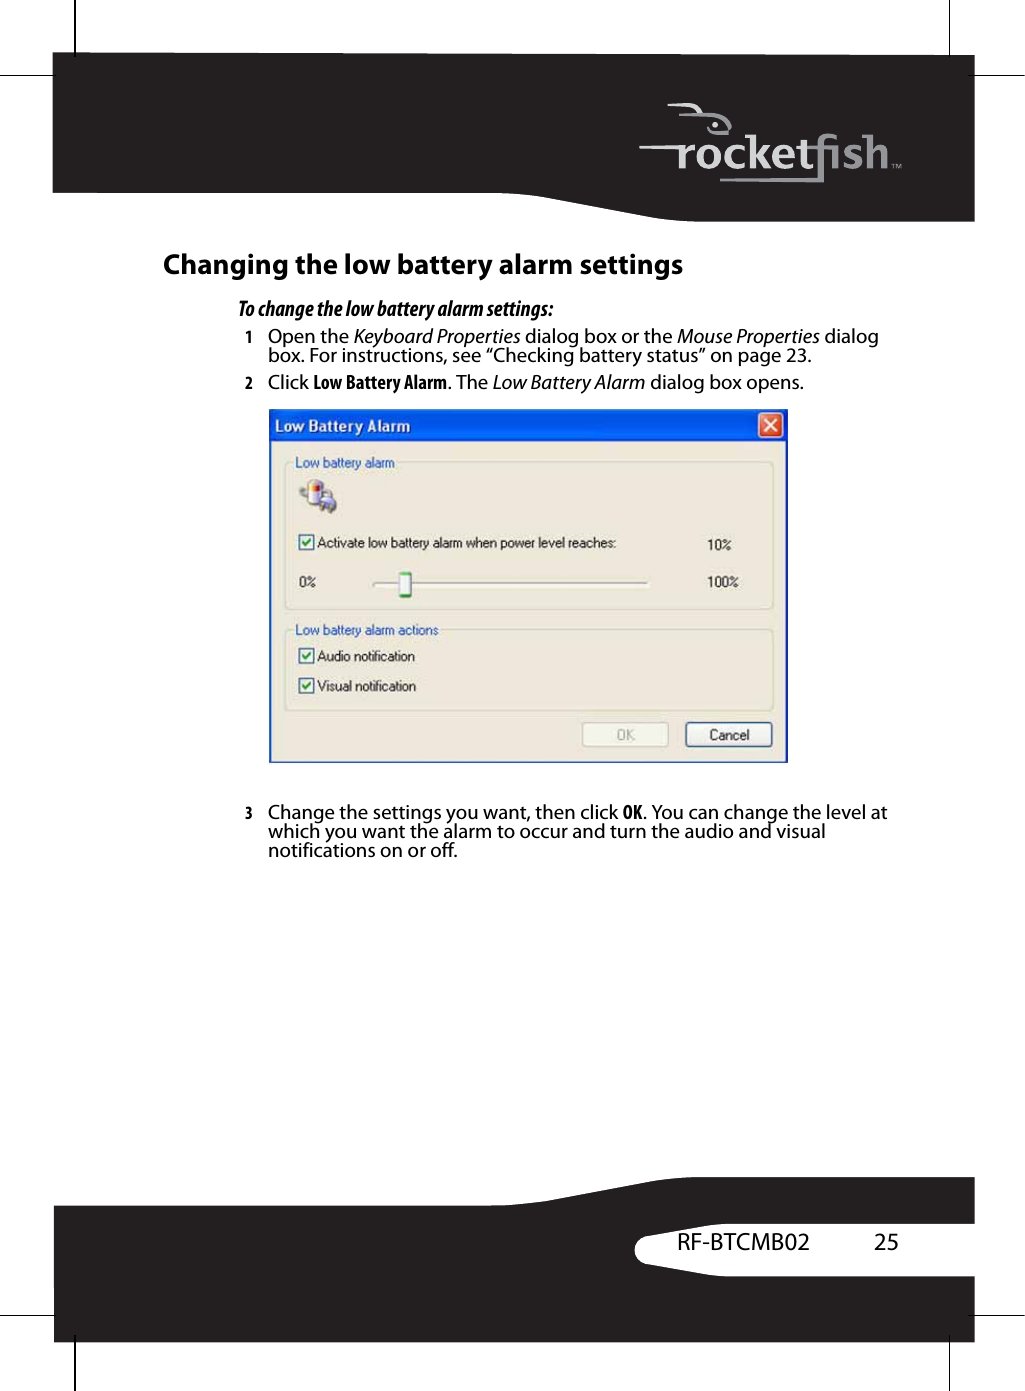 25RF-BTCMB02Changing the low battery alarm settingsTo change the low battery alarm settings:1Open the Keyboard Properties dialog box or the Mouse Properties dialog box. For instructions, see “Checking battery status” on page 23.2Click Low Battery Alarm. The Low Battery Alarm dialog box opens.3Change the settings you want, then click OK. You can change the level at which you want the alarm to occur and turn the audio and visual notifications on or off.